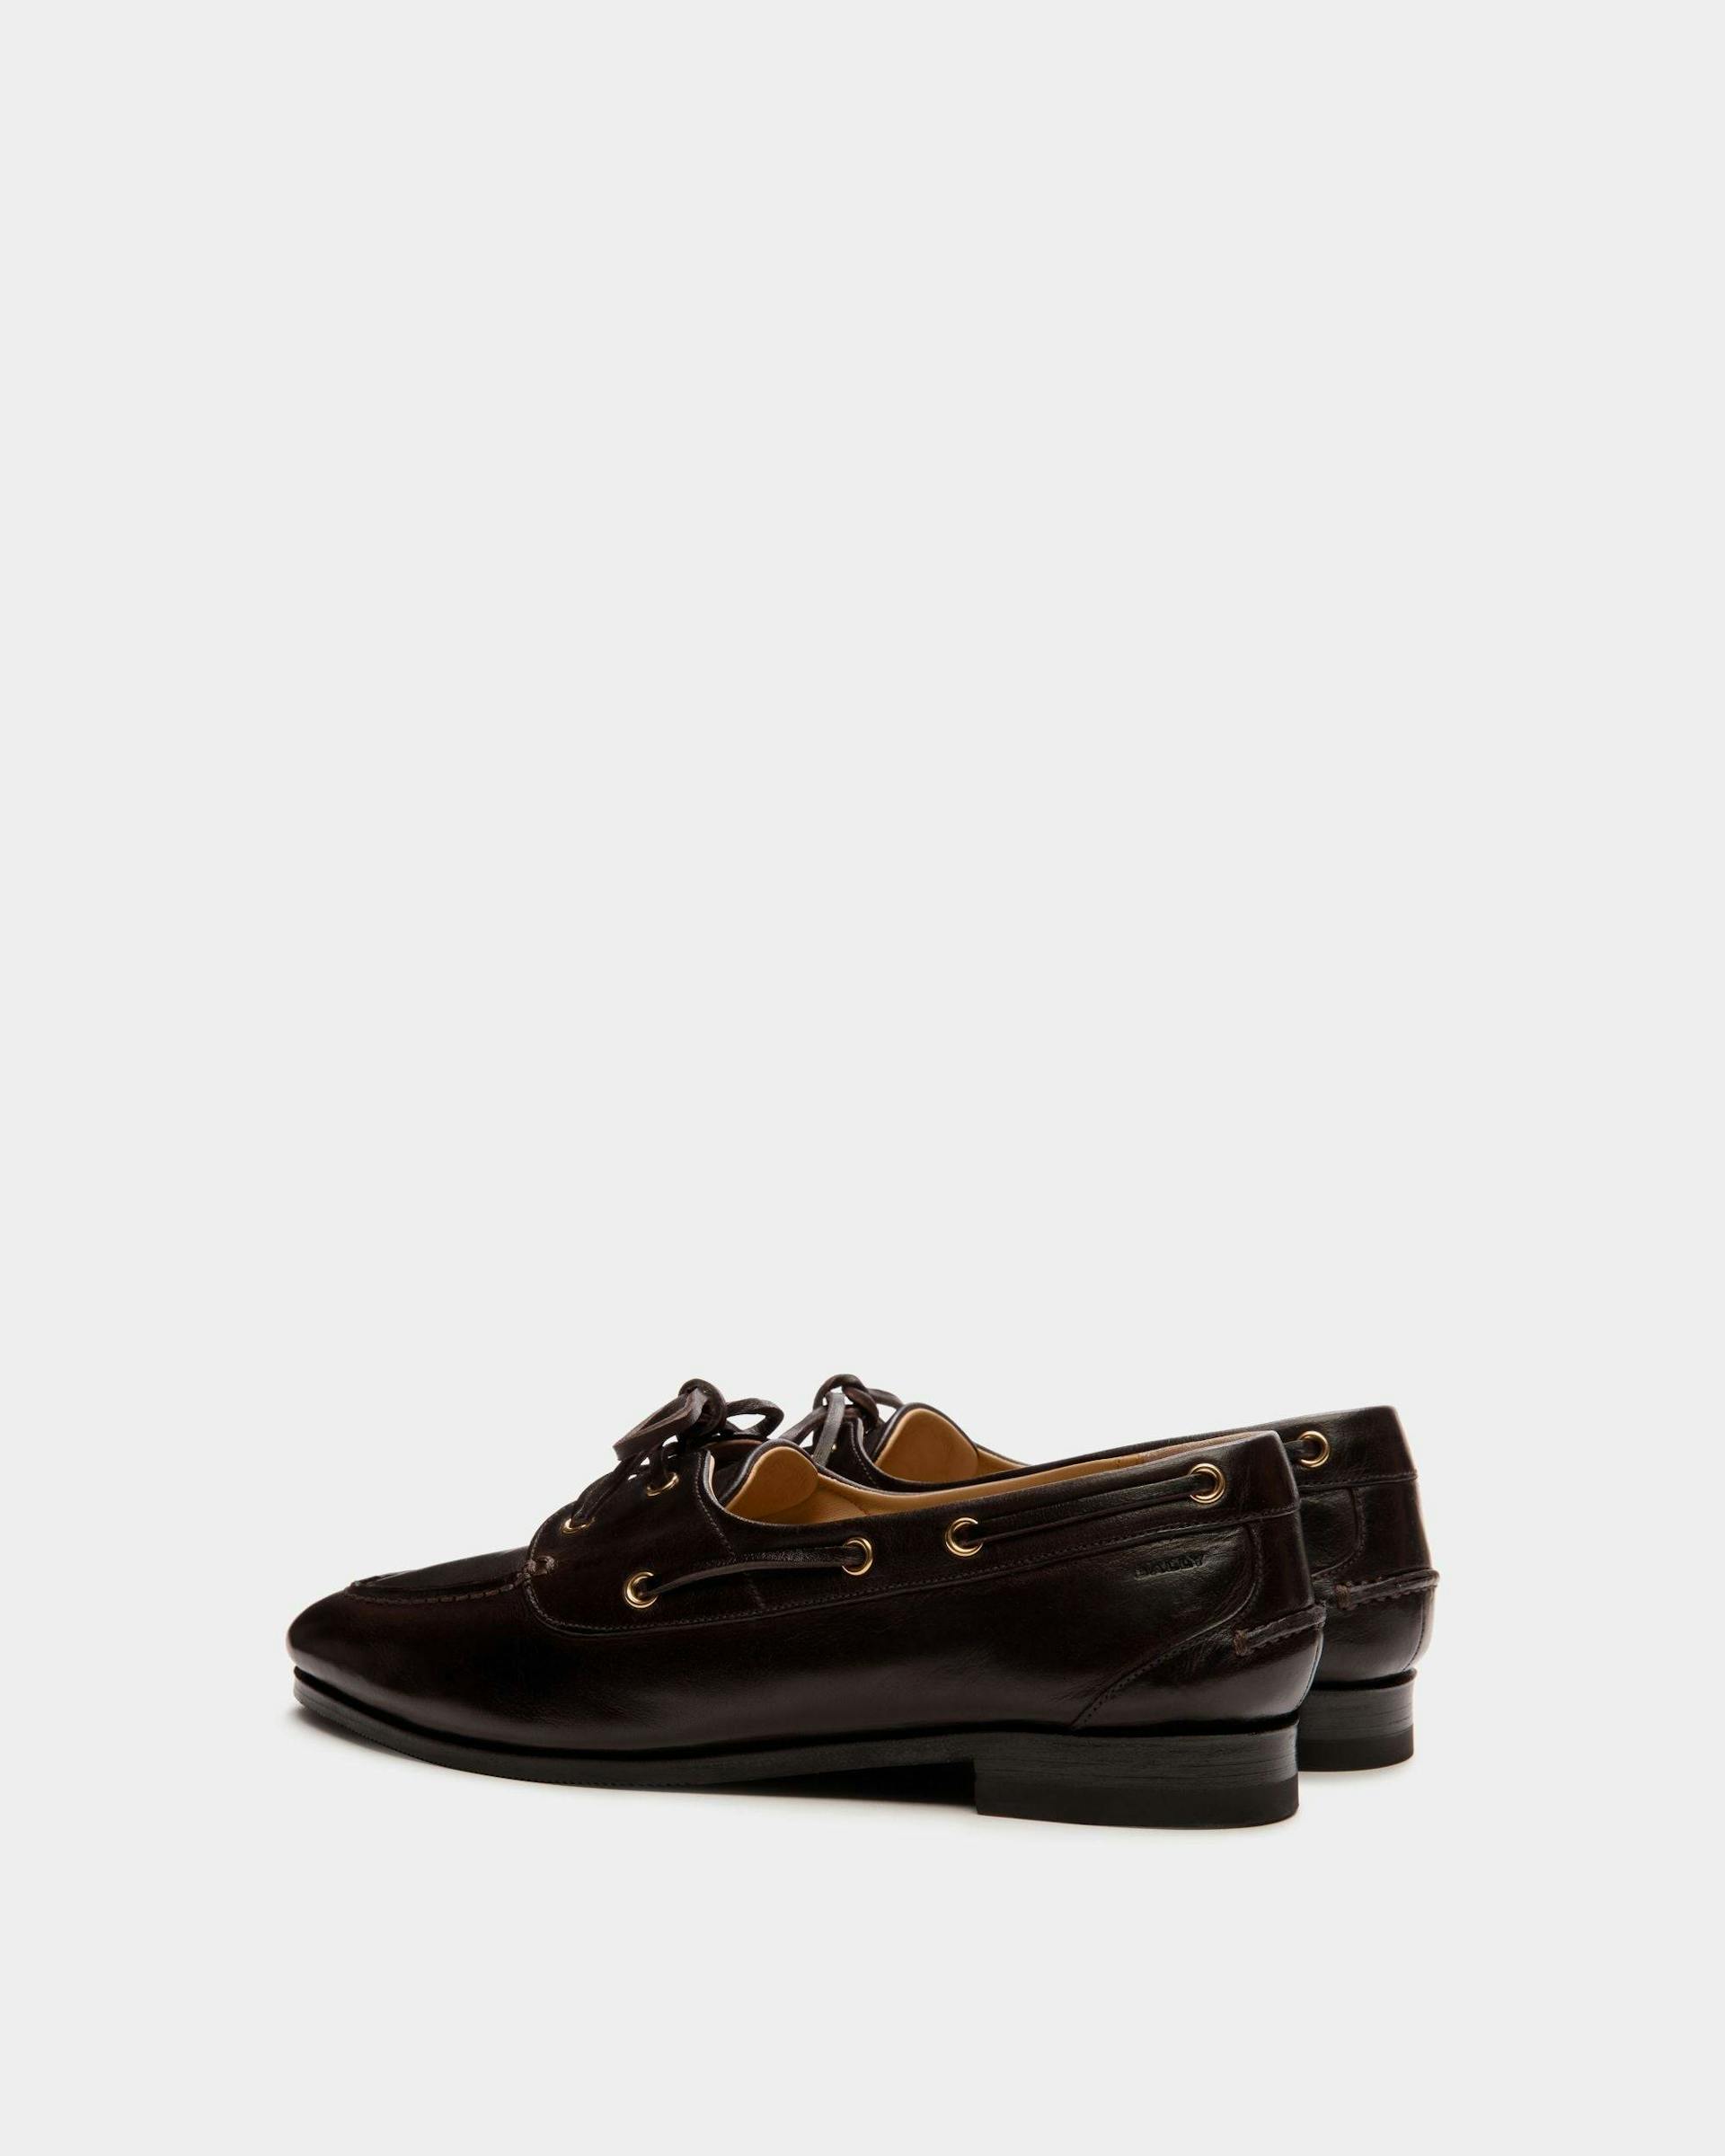 Women's Plume Moccasin in Dark Brown Leather | Bally | Still Life 3/4 Back